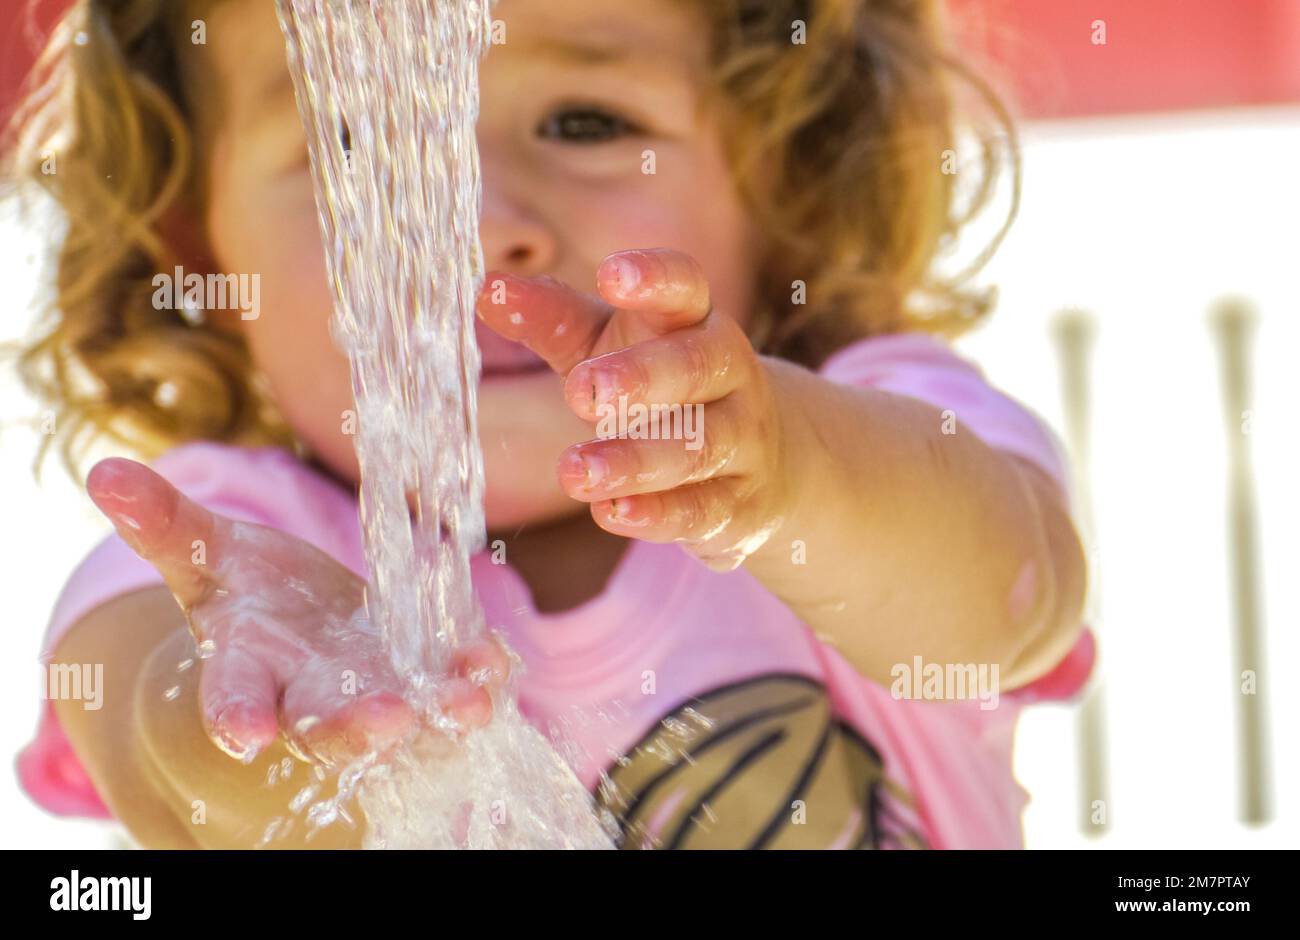 Young girl stands in front of water streeming from faucet washing her hands. Stock Photo